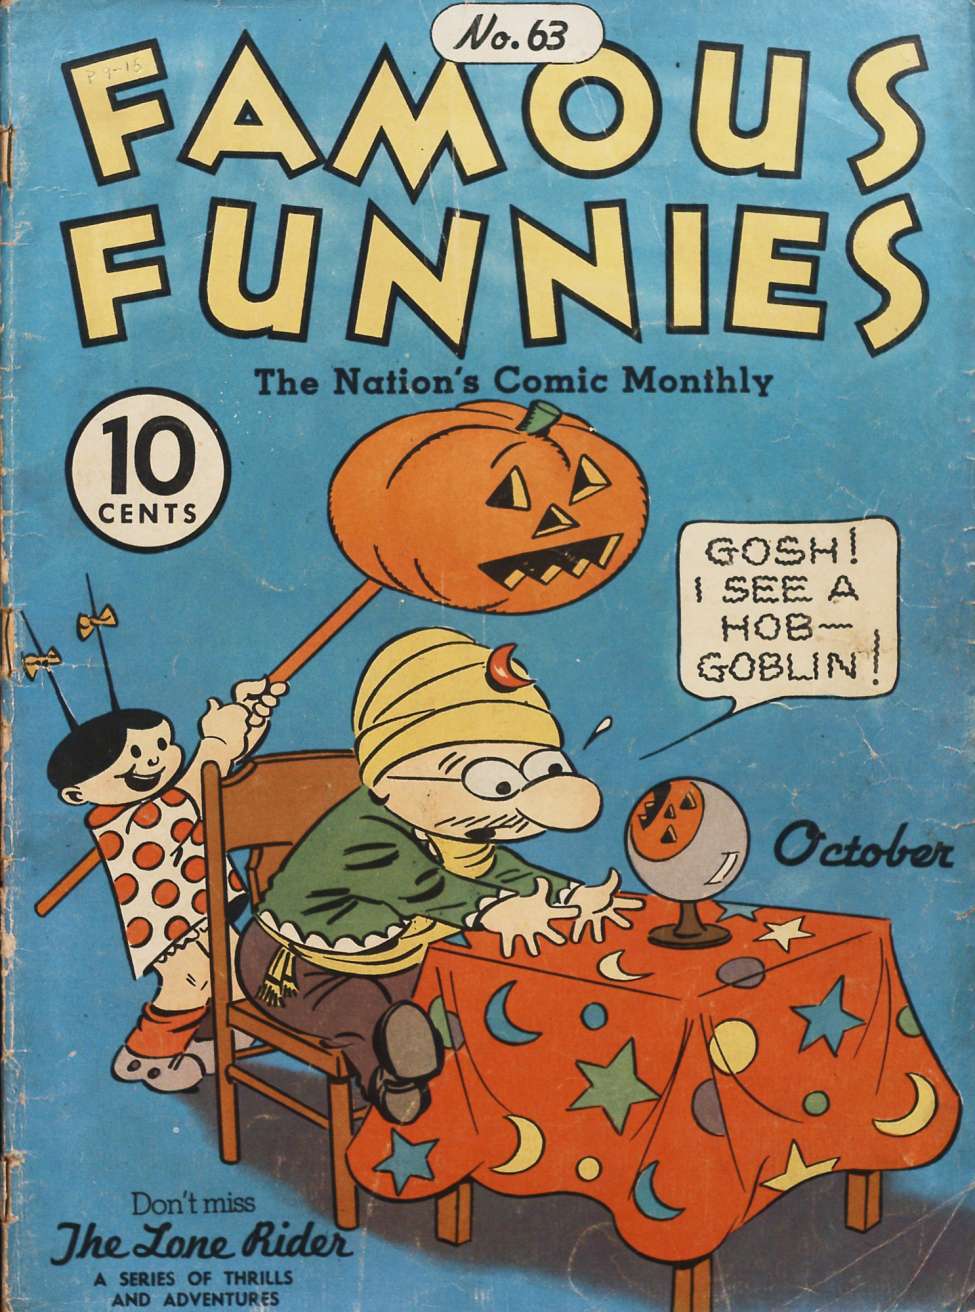 Book Cover For Famous Funnies 63 (alt) - Version 2